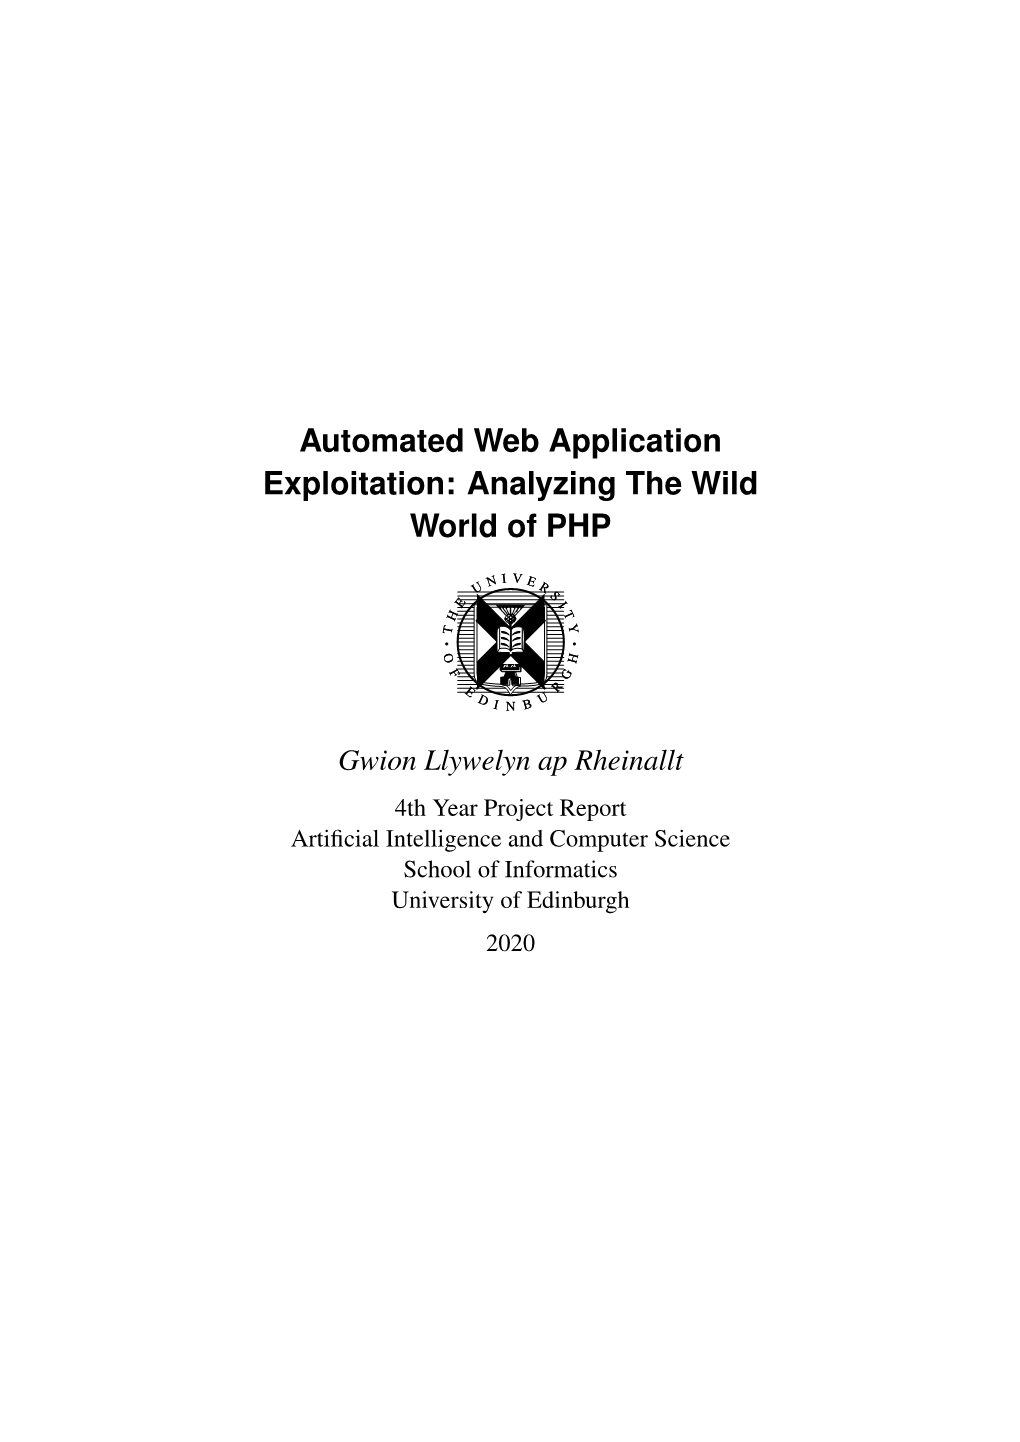 Automated Web Application Exploitation: Analyzing the Wild World of PHP